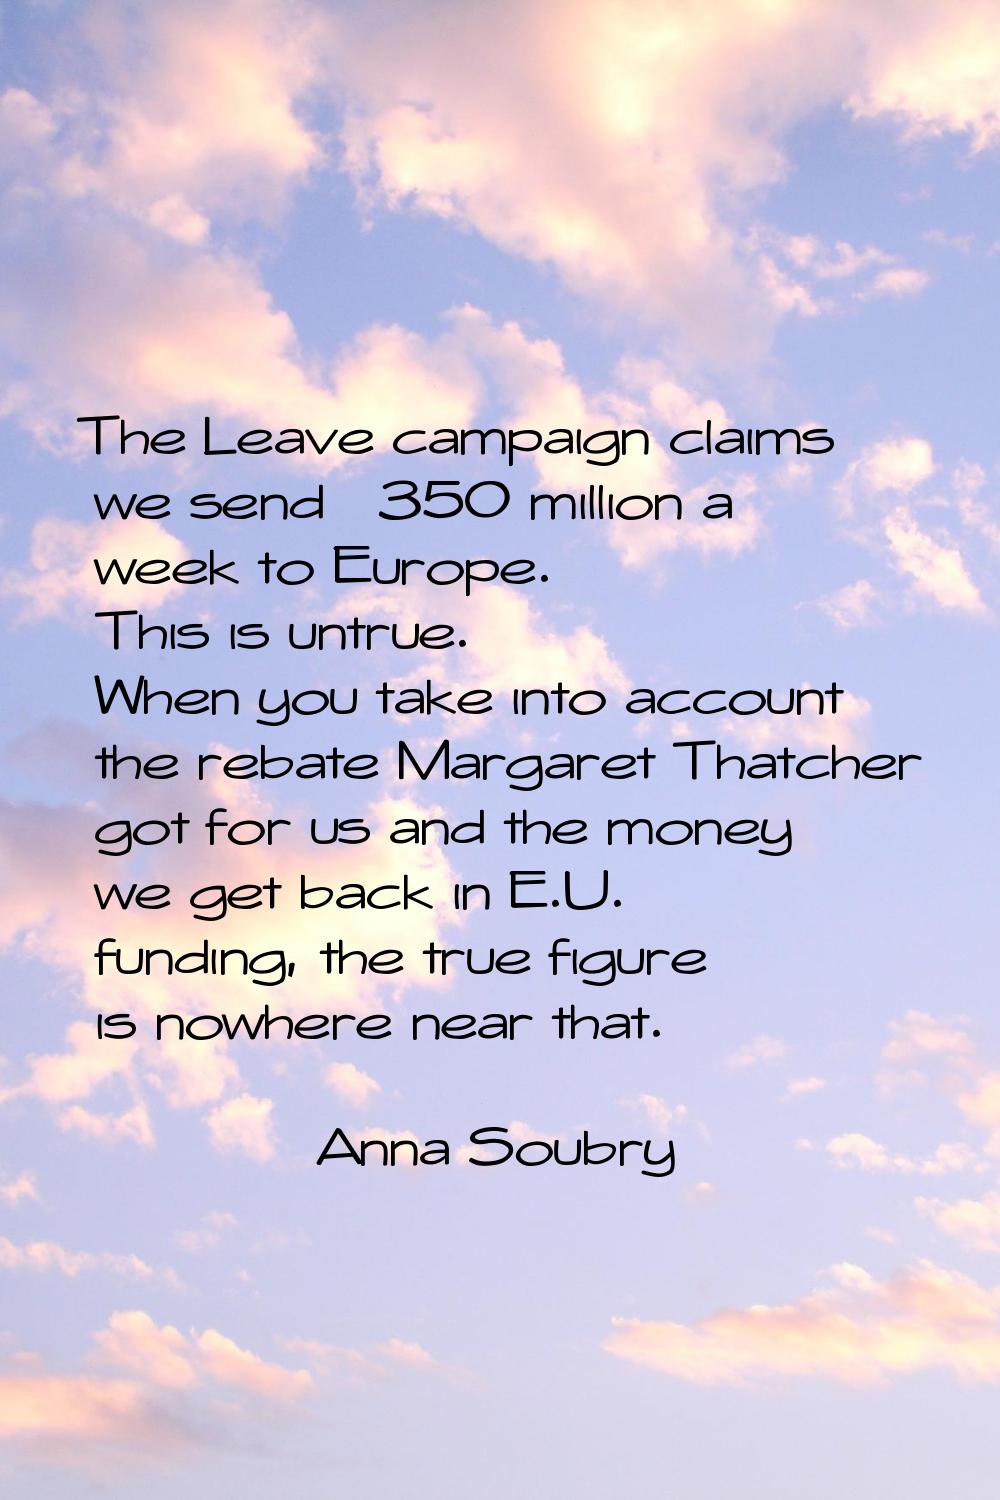 The Leave campaign claims we send £350 million a week to Europe. This is untrue. When you take into